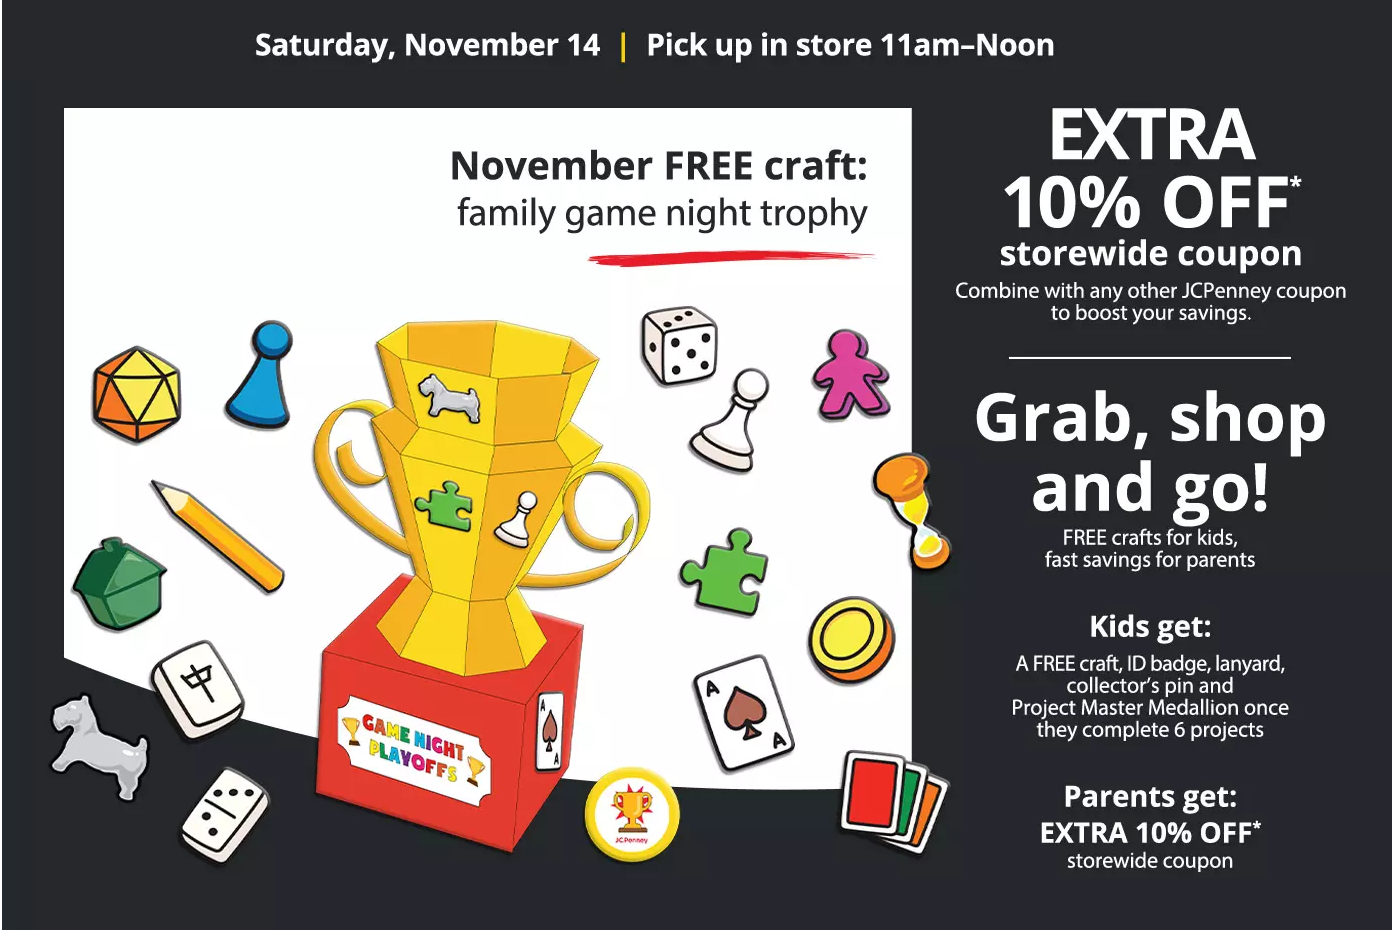 JCPenney Kids Zone – Pick Up a Family Game Night Trophy on 11/14!